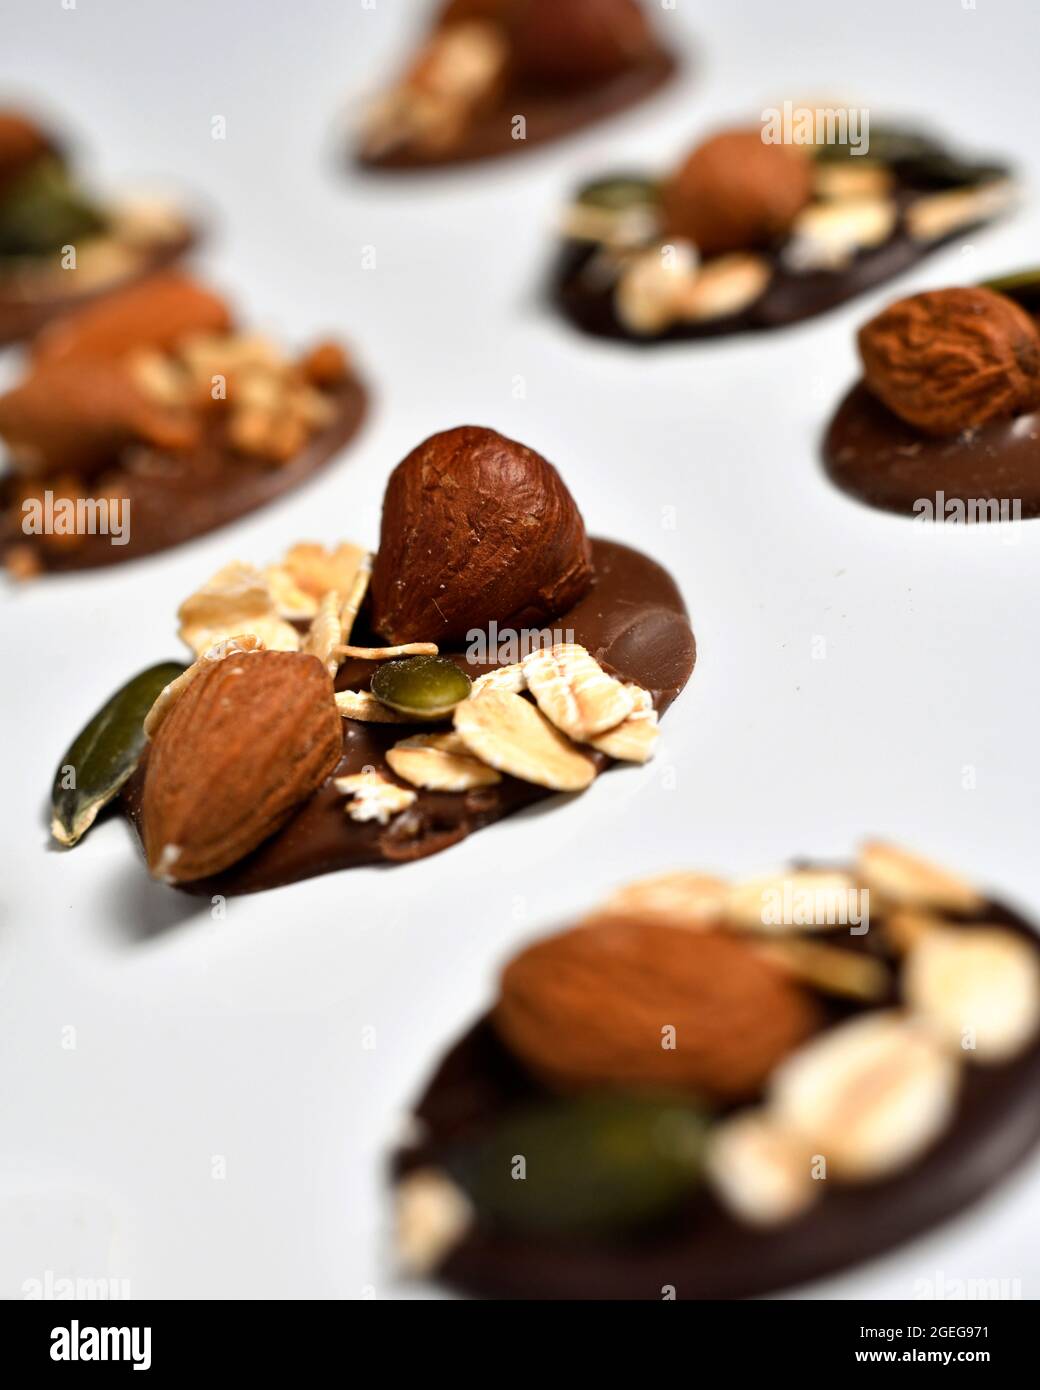 Mendiants, traditional French confections composed of a chocolate disk studded with nuts and dried fruits representing the four mendicant or monastic Stock Photo